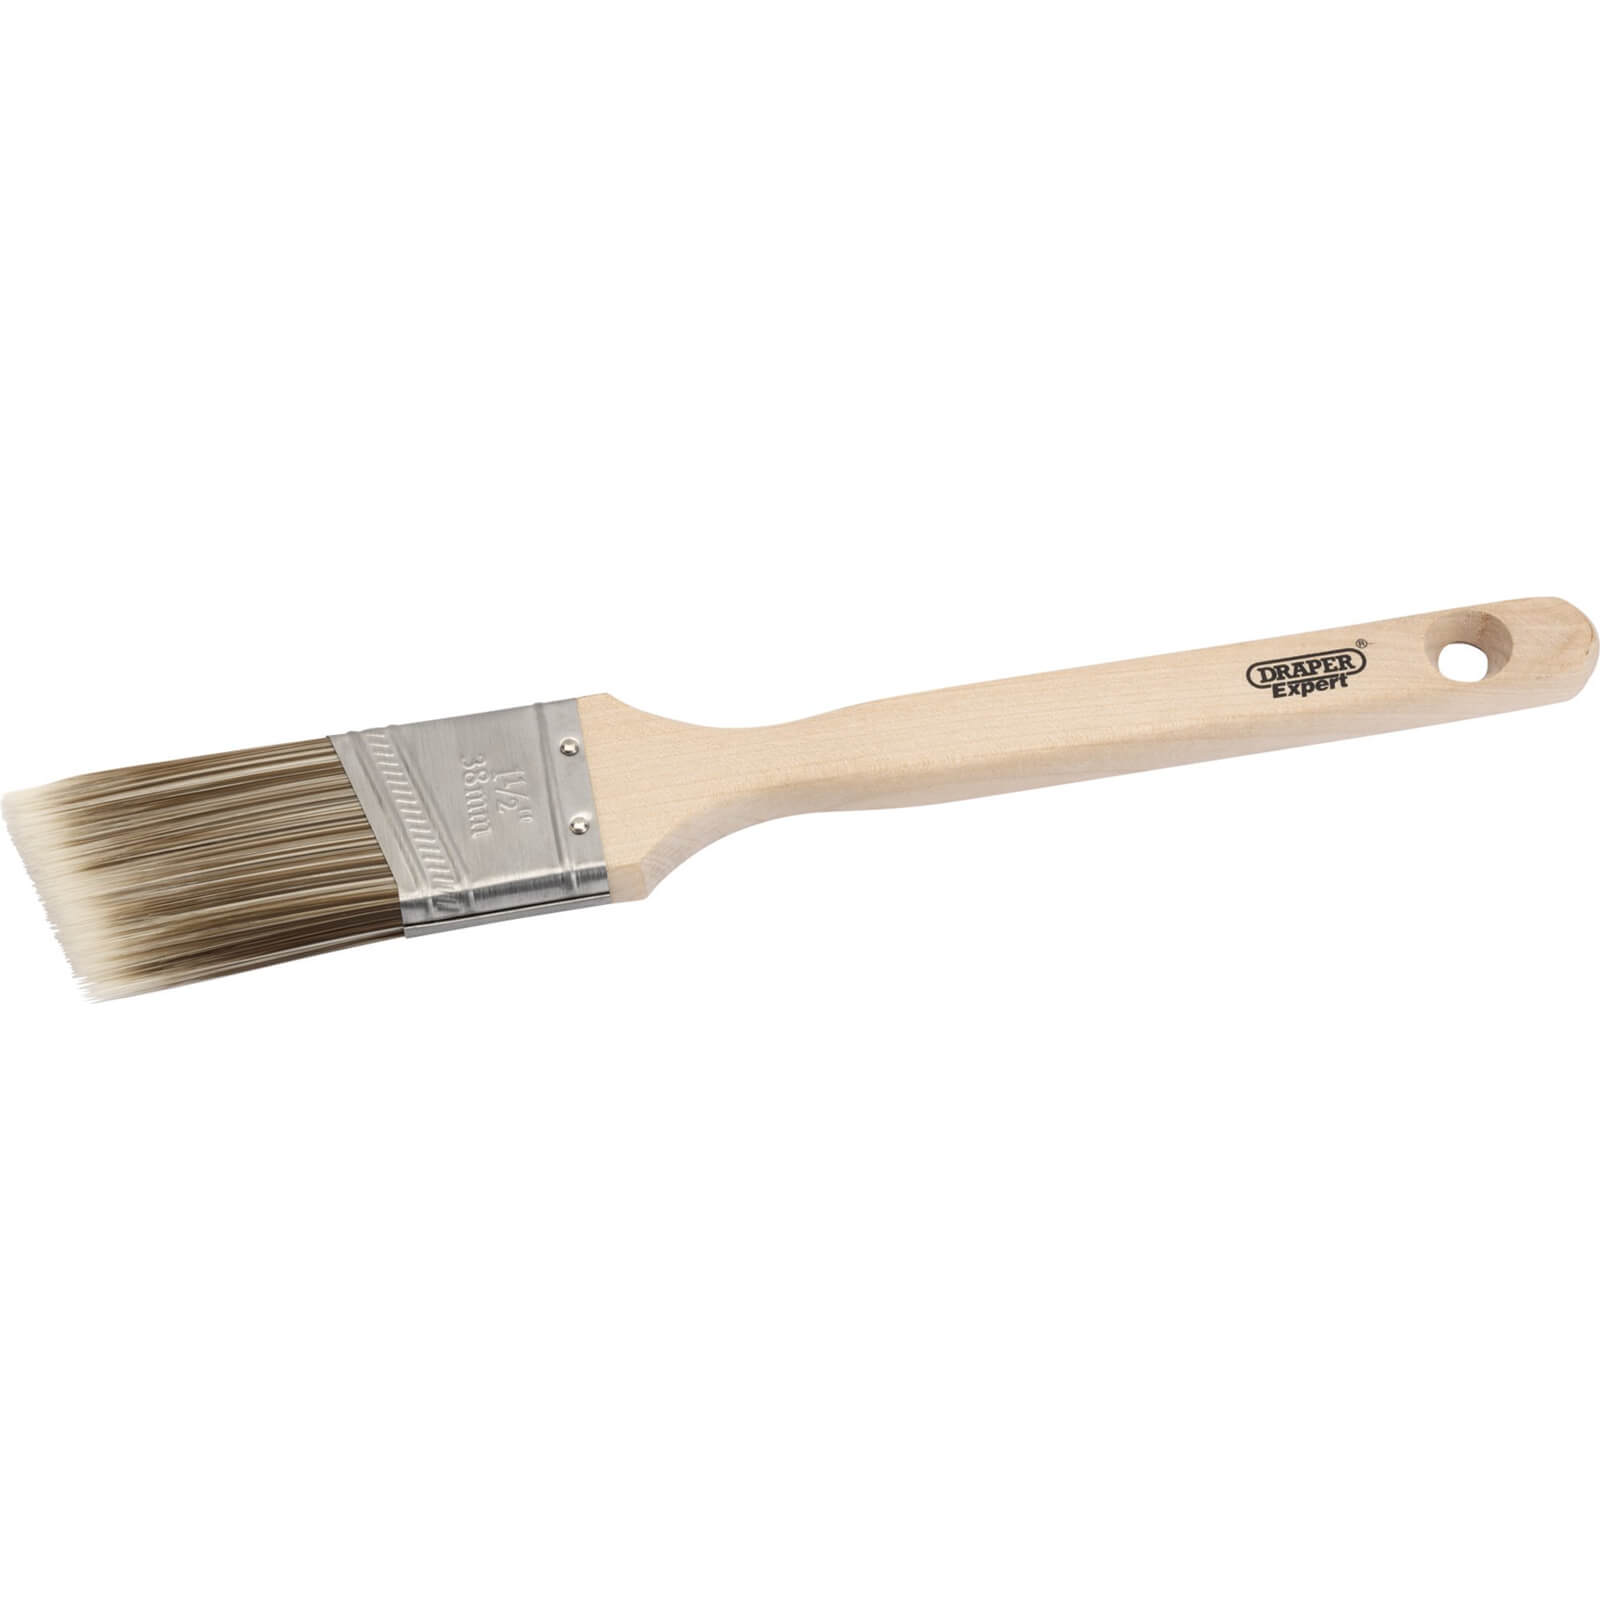 Photos - Putty Knife / Painting Tool Draper Expert Angled Paint Brush 38mm 